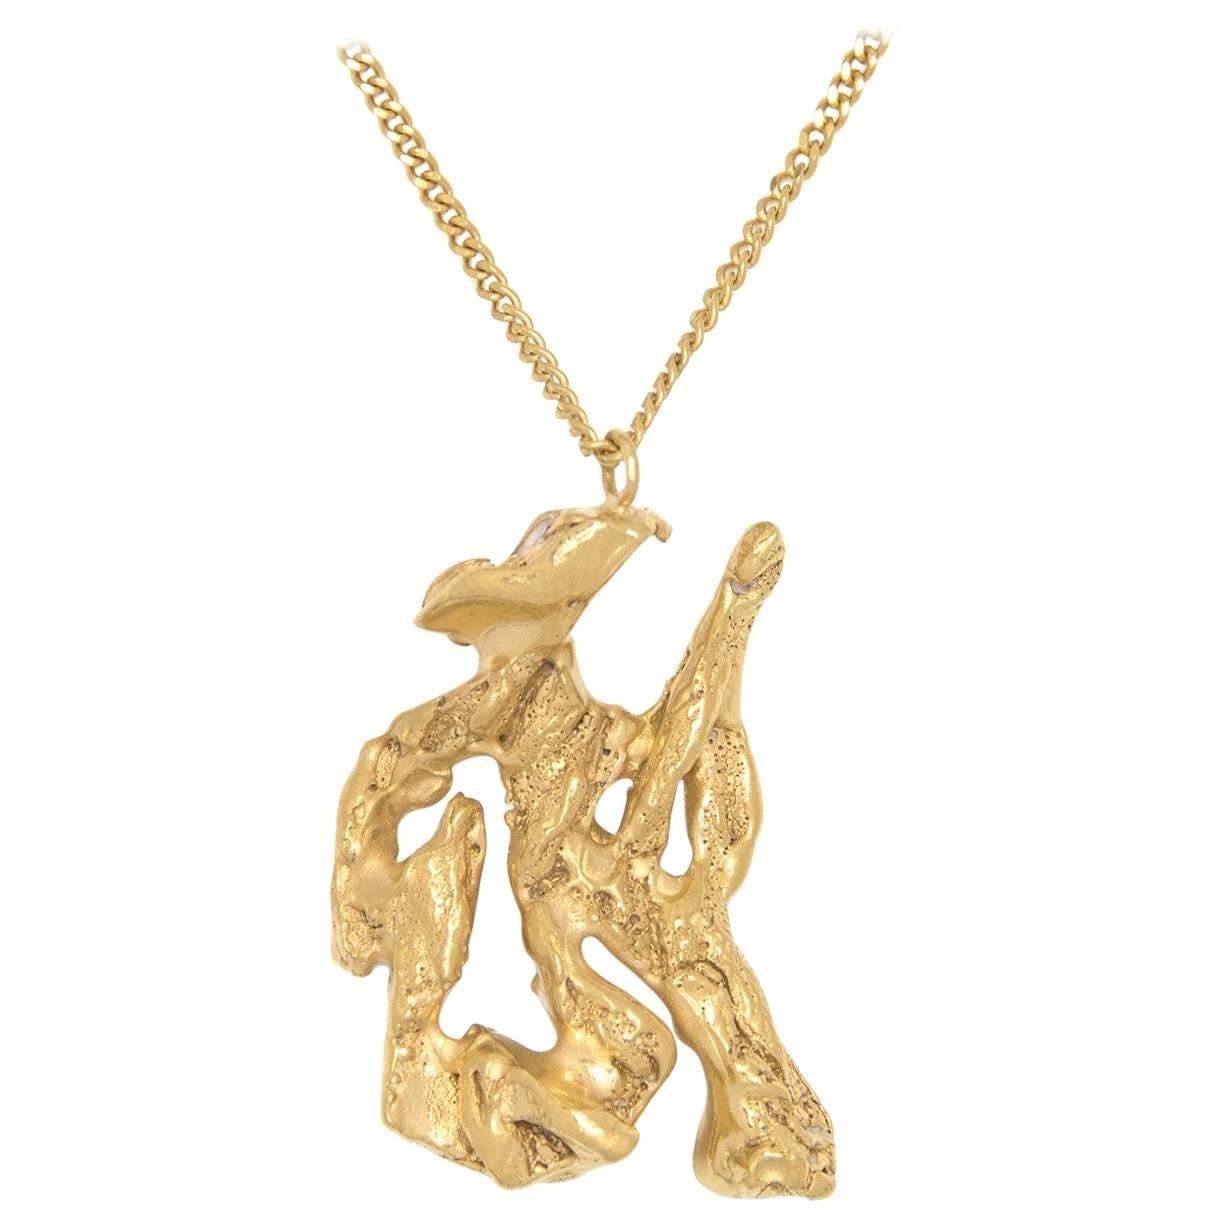 Loveness Lee - Chinese Zodiac Snake - Horoscope Gold Pendant Necklace For Sale